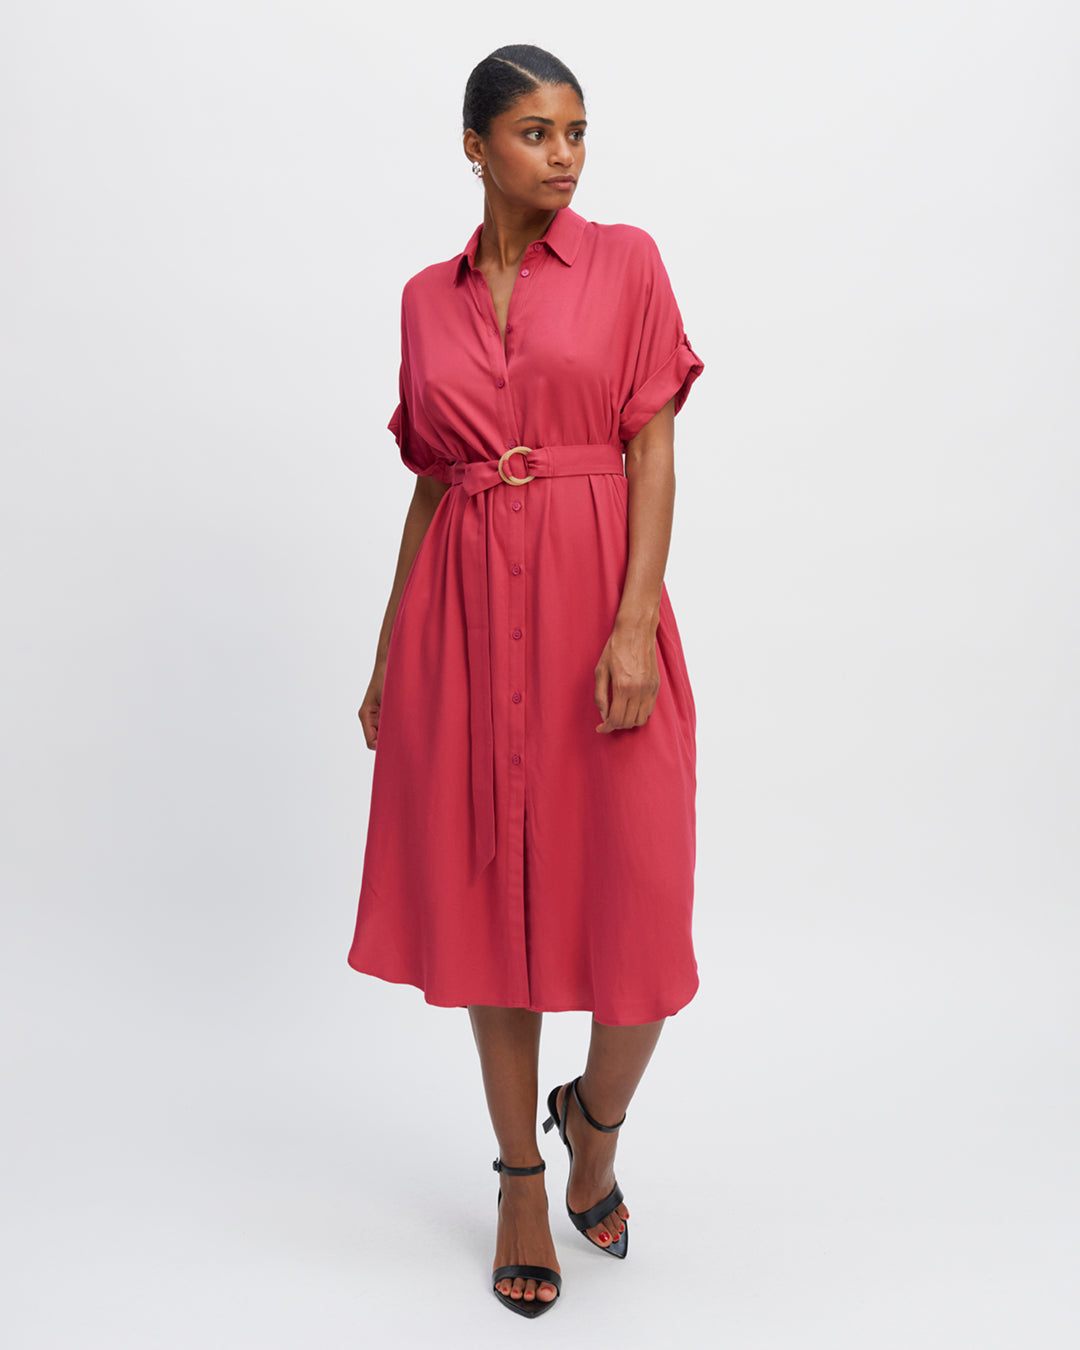 dress-pink-tight-cut-neck-blouse-short-sleeves-with-reverse-button-button-flap-belt-with-buckle-17H10-tailors-for-women-paris